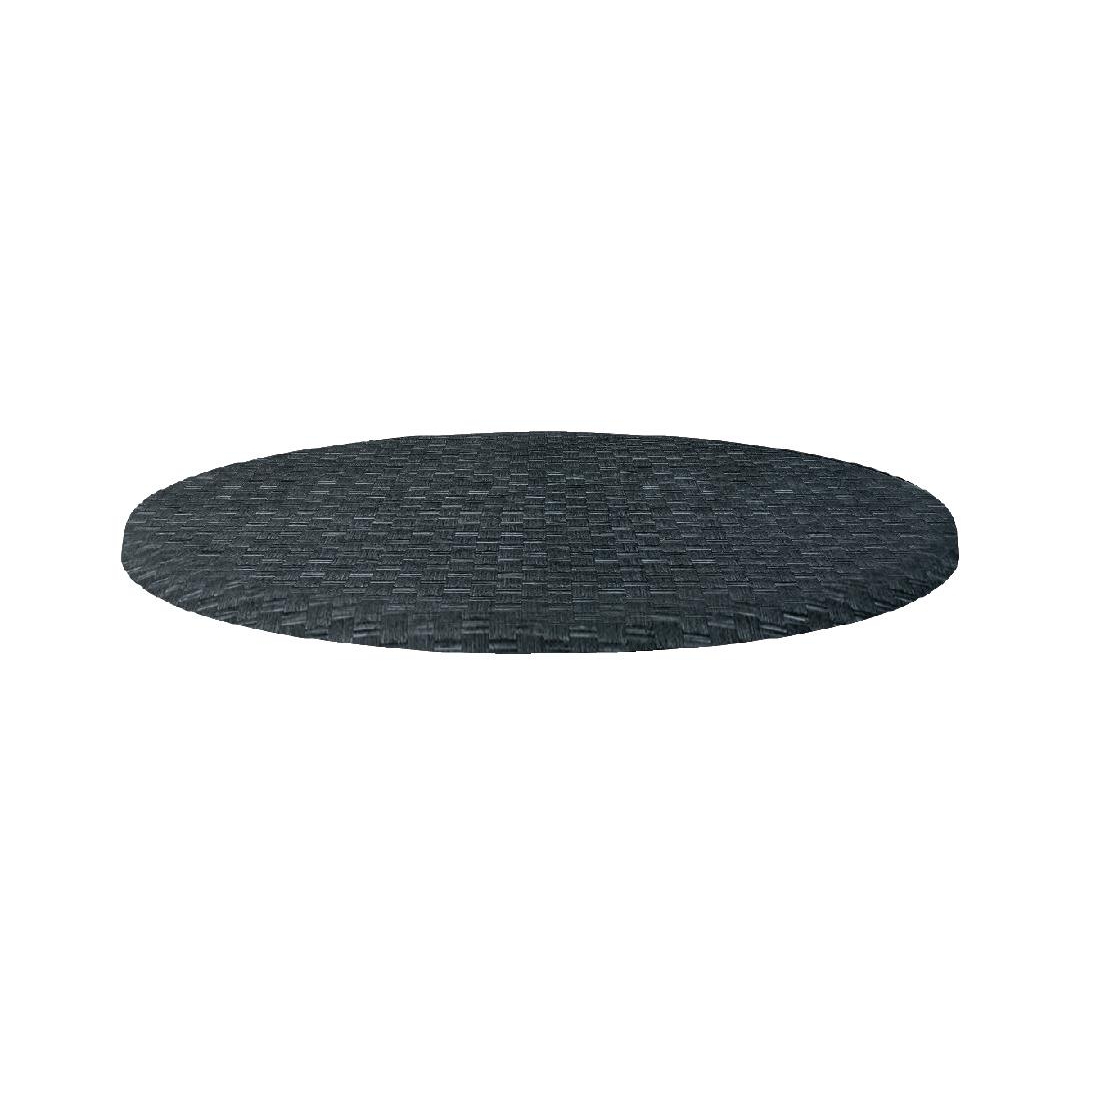 Plateau de table rond Werzalit rotin anthracite 700mm